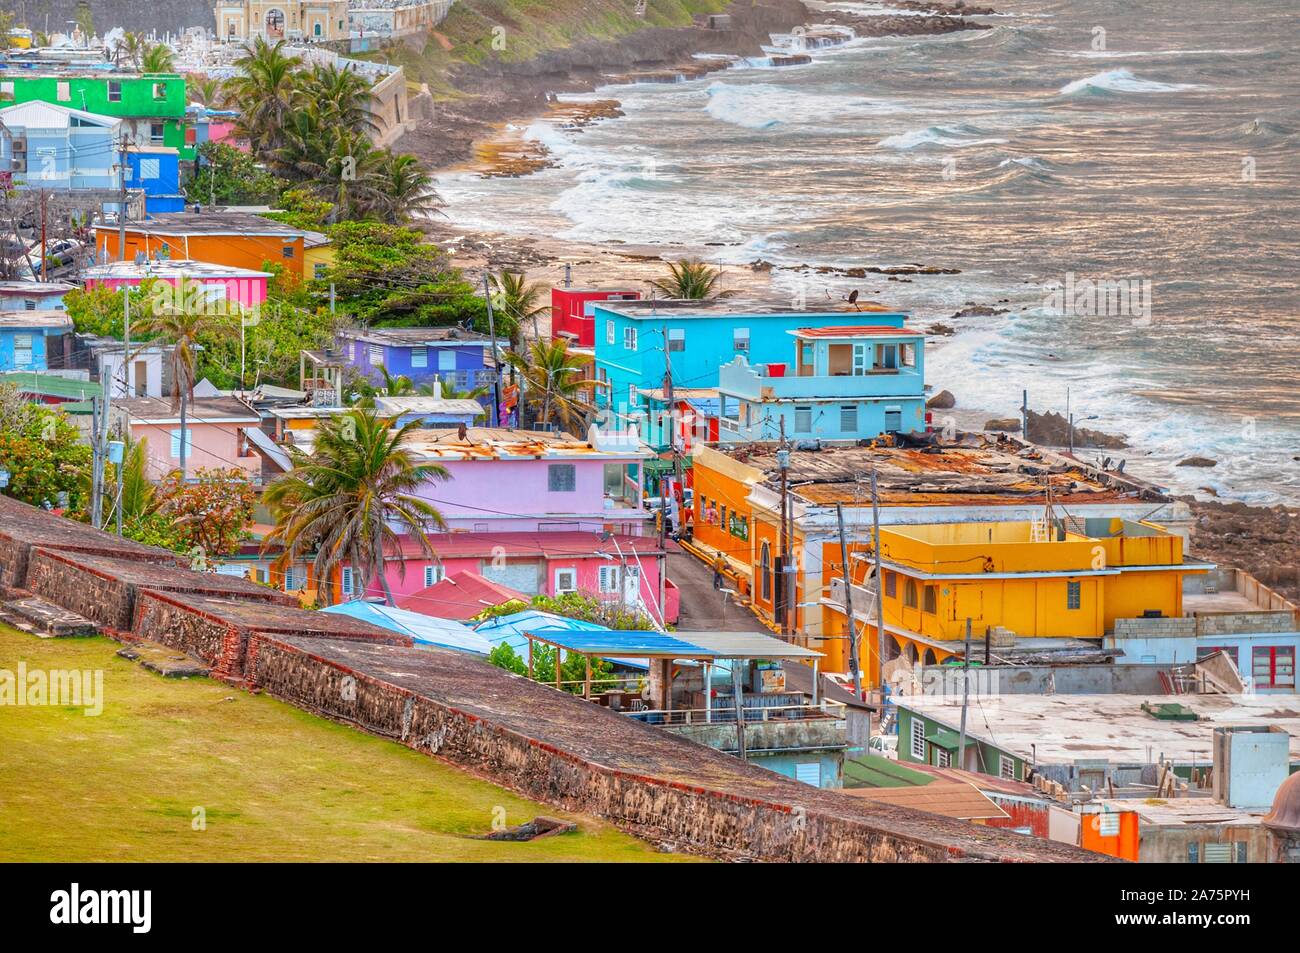 Colorful houses line the hillside over looking the beach in San Juan, Puerto Rico Stock Photo